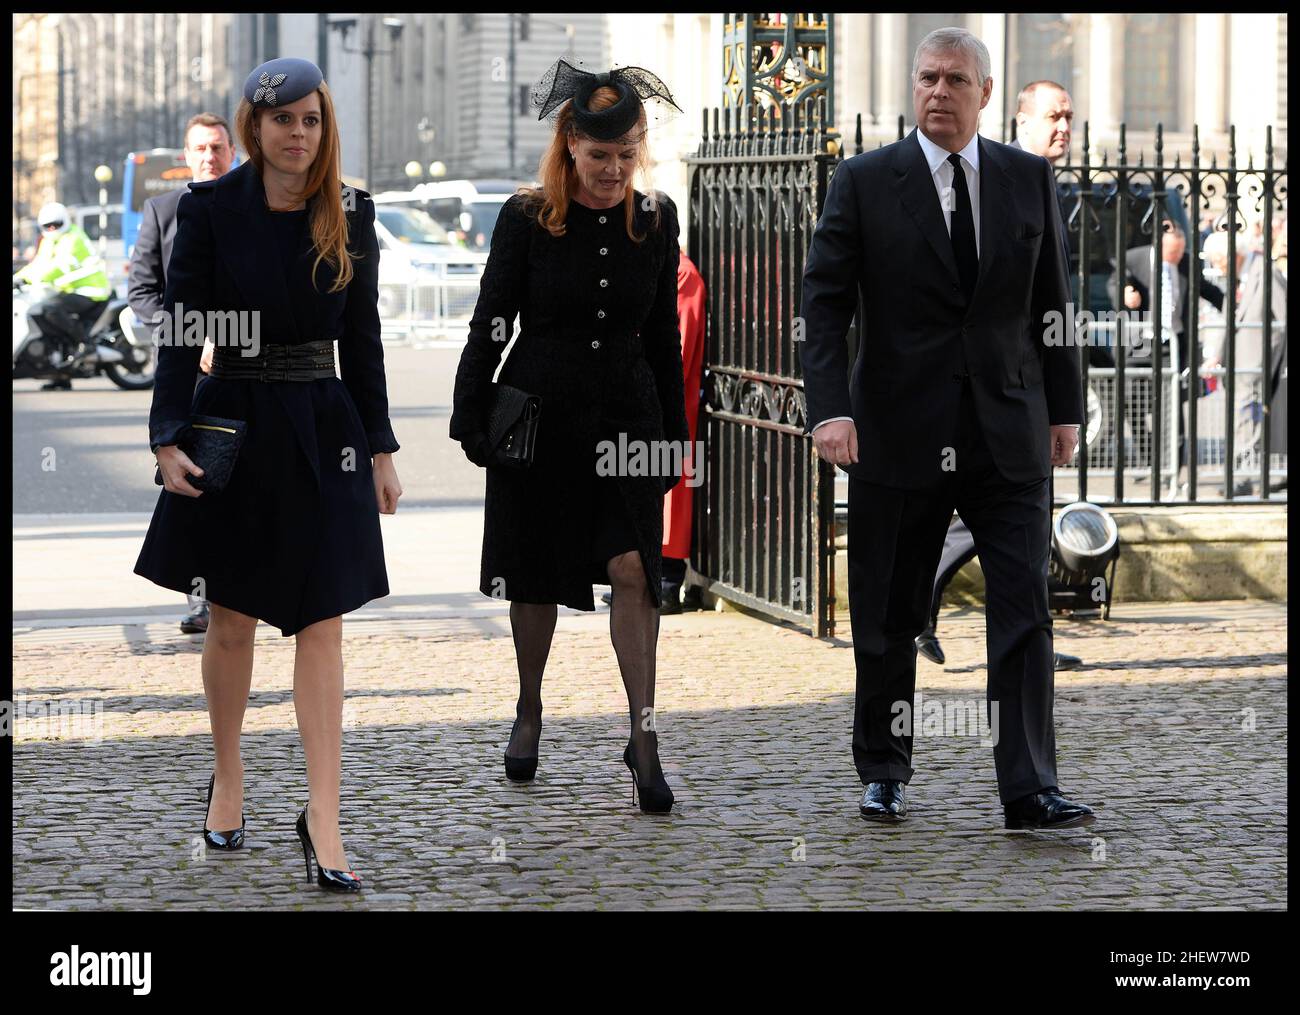 FileImage ©Licensed to Parsons Media. Prince Andrew is to face a civil case in the US. It has been reported that Prince Andrew is to face a civil case in the US over allegations he sexually assaulted a woman when she was 17.  Virginia Giuffre is suing the prince, claiming he abused her in 2001.   Princess Beatrice of York,  21 Feb 2014 - Smart style: Sarah Ferguson and Prince Andrew, Duke of York arrives at Westminster Abbey for the service to celebrate the life and work of Sir David Frost, Westminster Abbey, London, United Kingdom. Thursday, 13th March 2014. Picture by Andrew Parsons / Parson Stock Photo